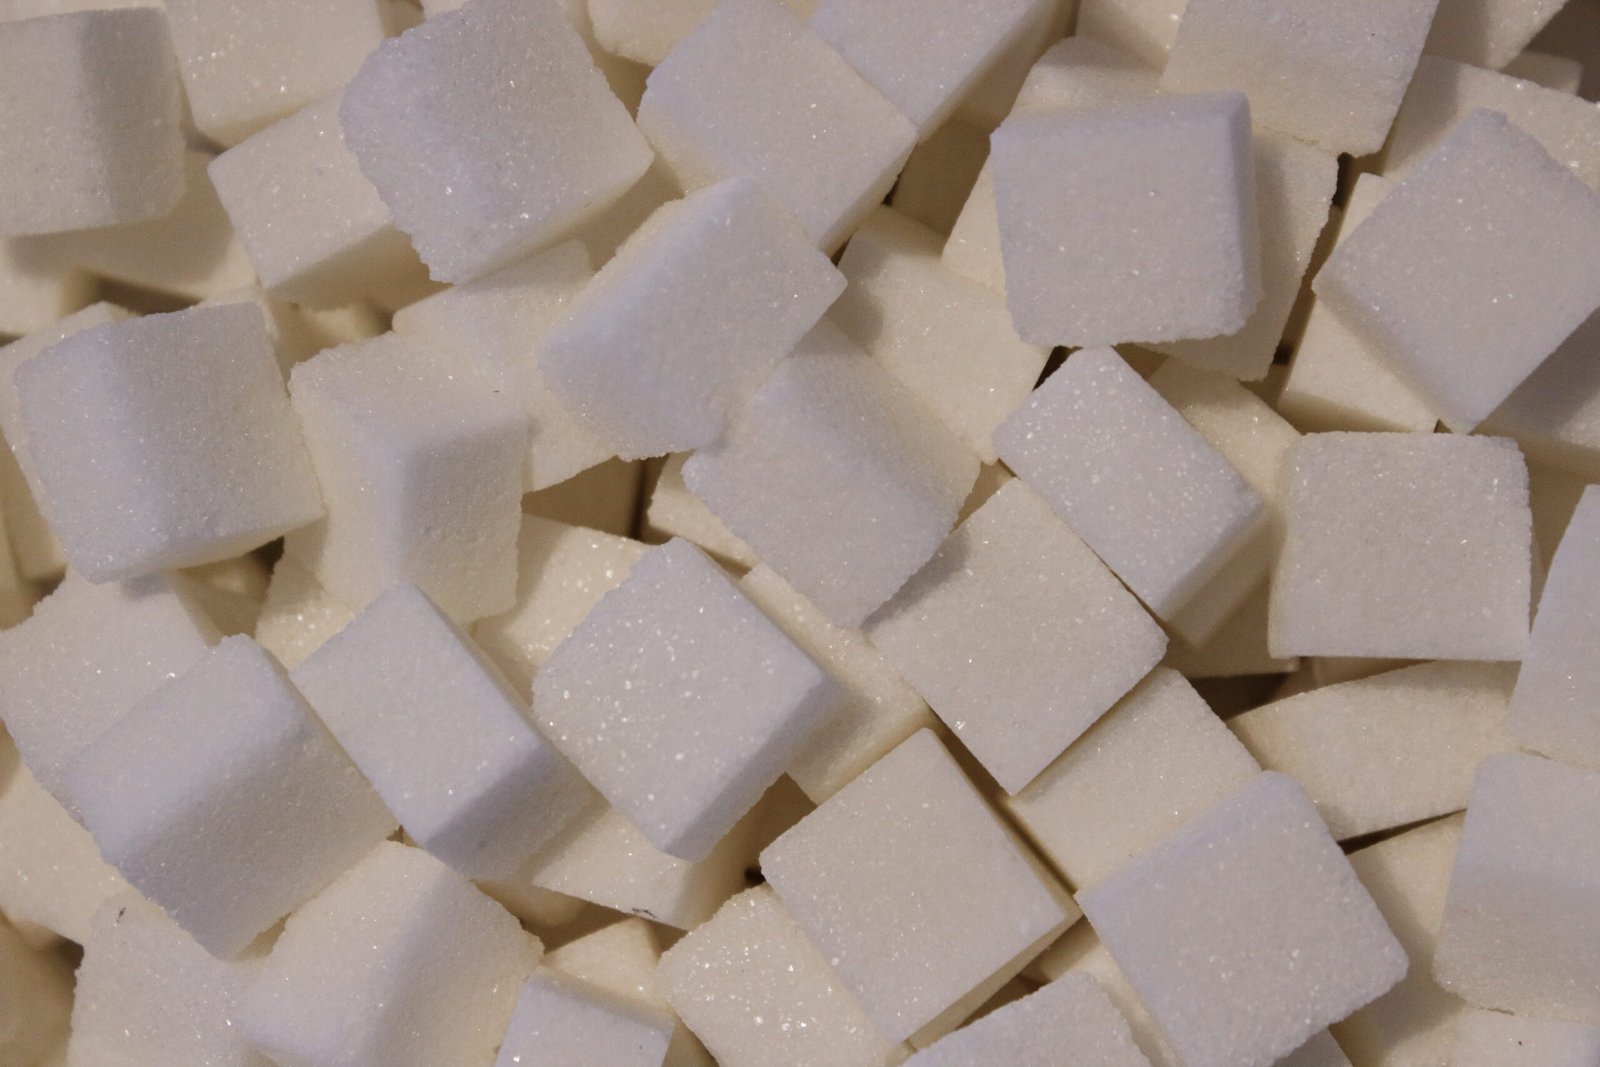 How Sugar Affects the Brain: A Sweet and Complex Relationship